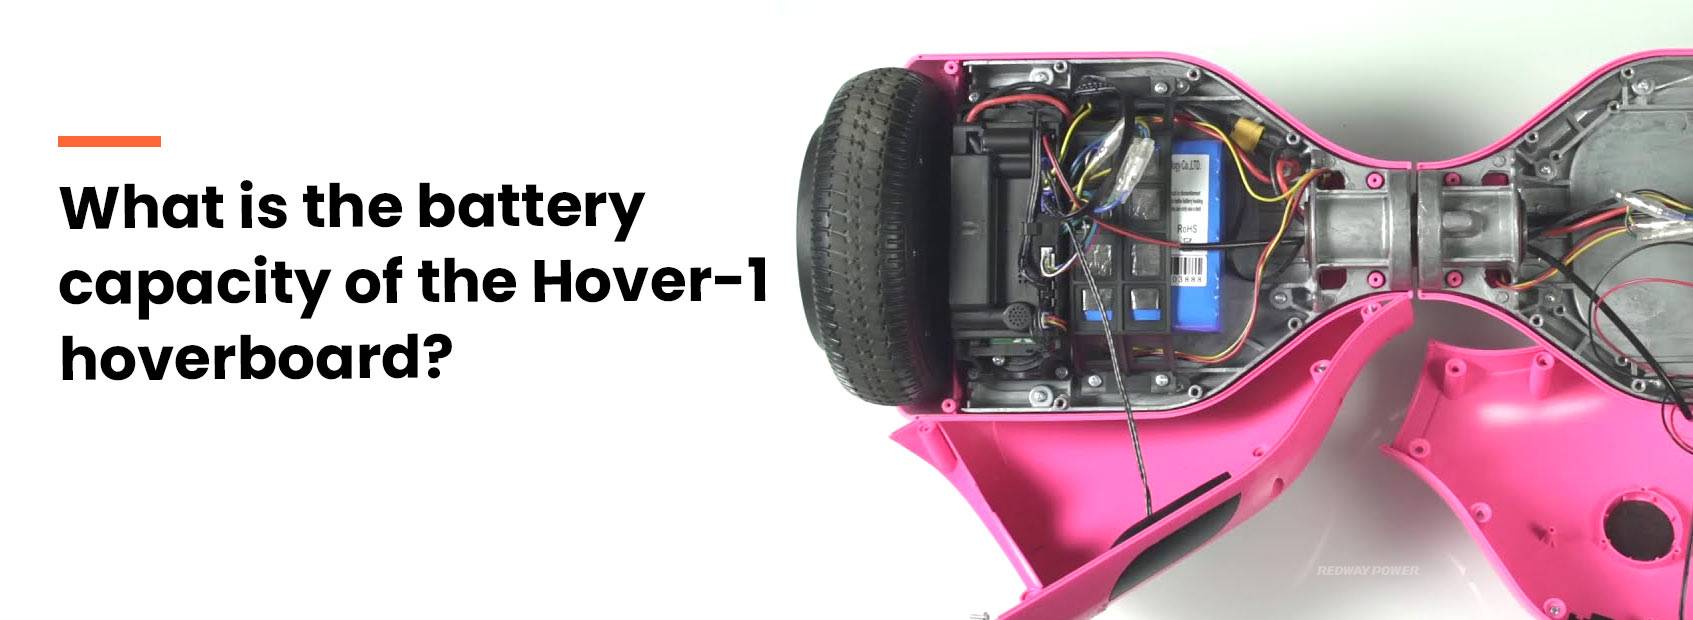 What is the battery capacity of the Hover-1 hoverboard?